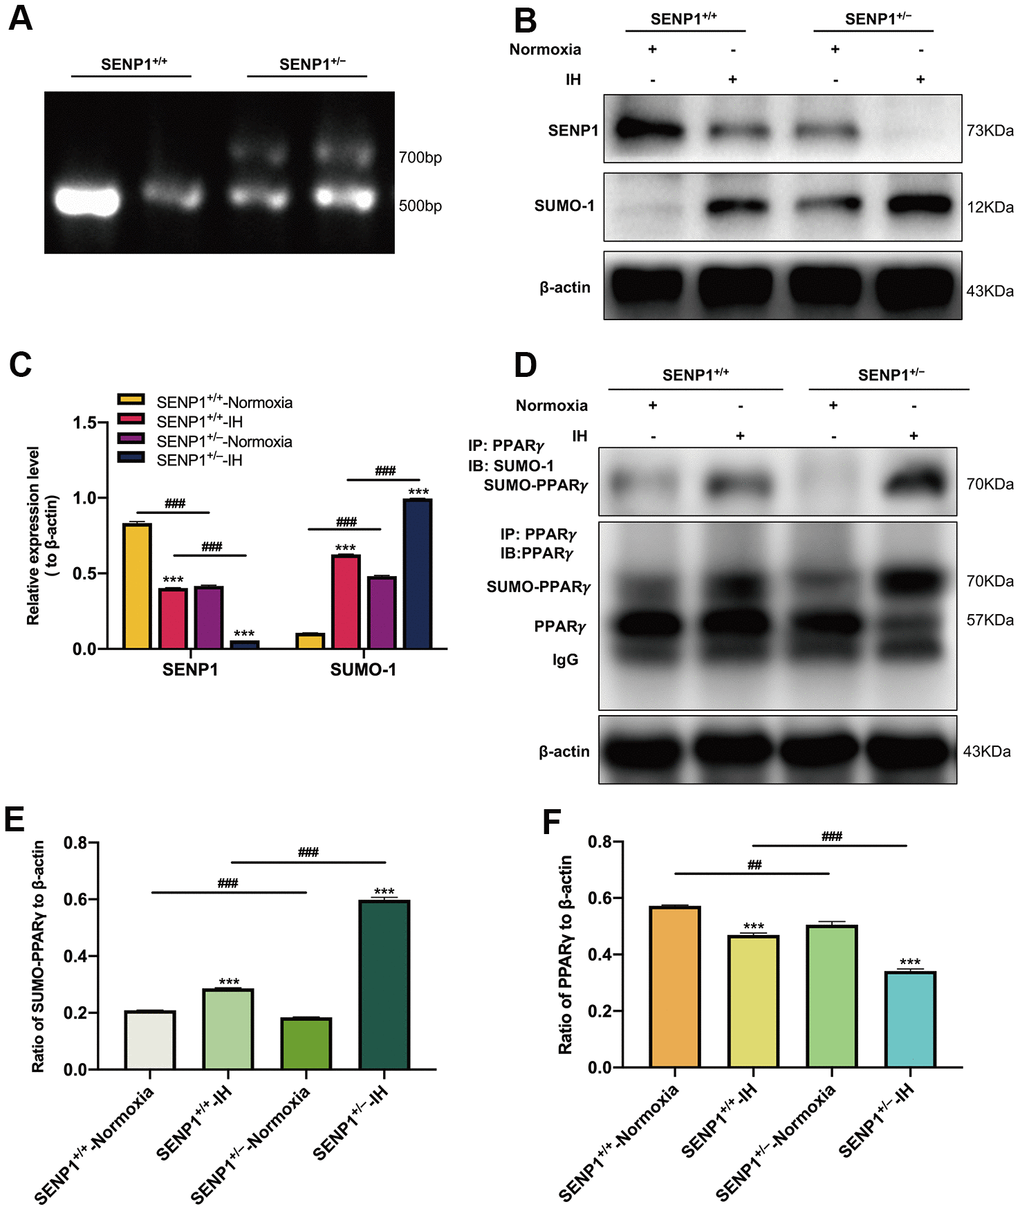 SENP1 depletion promotes the SUMOylation of peroxisome proliferator-activated receptor-γ (PPARγ) in mice under intermittent hypoxia (IH) condition. (A) The genotype of mice was identified by agarose gel electrophoresis. (B, C) The expression of SENP1 and SUMO-1 in mice with or without SENP1 knockdown under normoxic and IH conditions. ***p ###p +/+-IH group. (D–F) The effects of IH on the SUMOylation of PPARγ (D, E) and the level of PPARγ (D, F) were detected by co-immunoprecipitation followed by western blot analysis. ***p ##p ###p +/+-IH group. Normoxia: mice were treated under normoxic condition. IH: mice were exposed under IH. SENP1+/+, wild type mice; SENP1+/−, SENP1 knockdown mice.